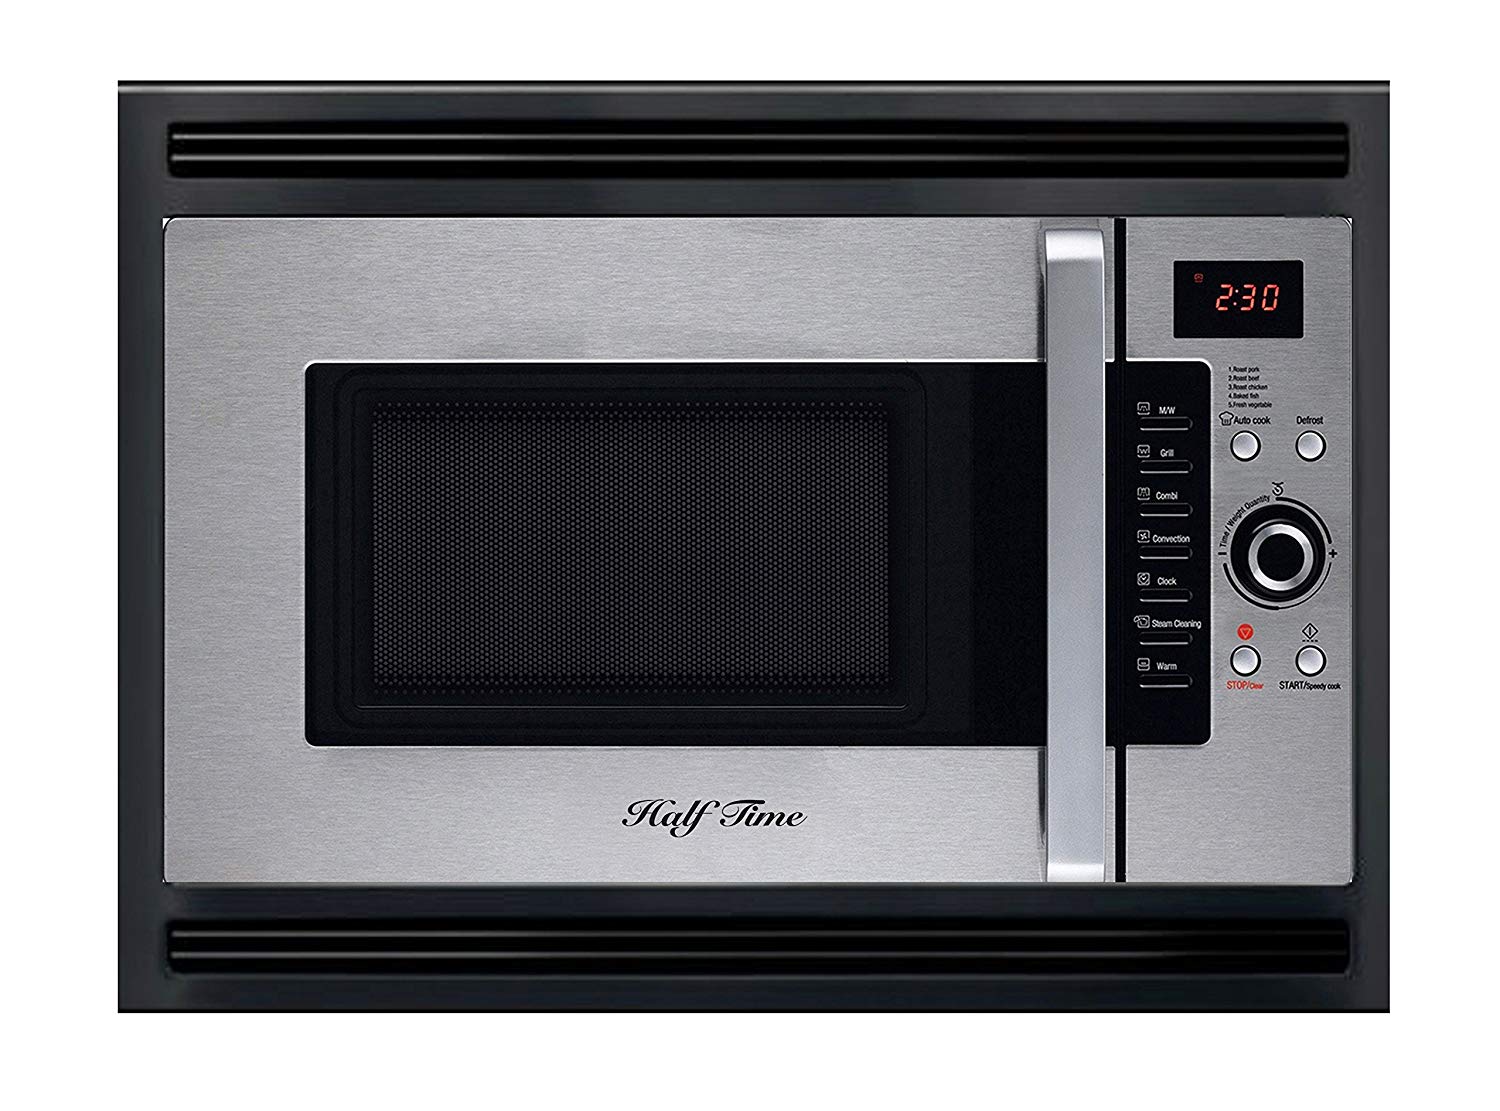 Built In Microwaves 8 Models Common And Drawer Microwave Ovens